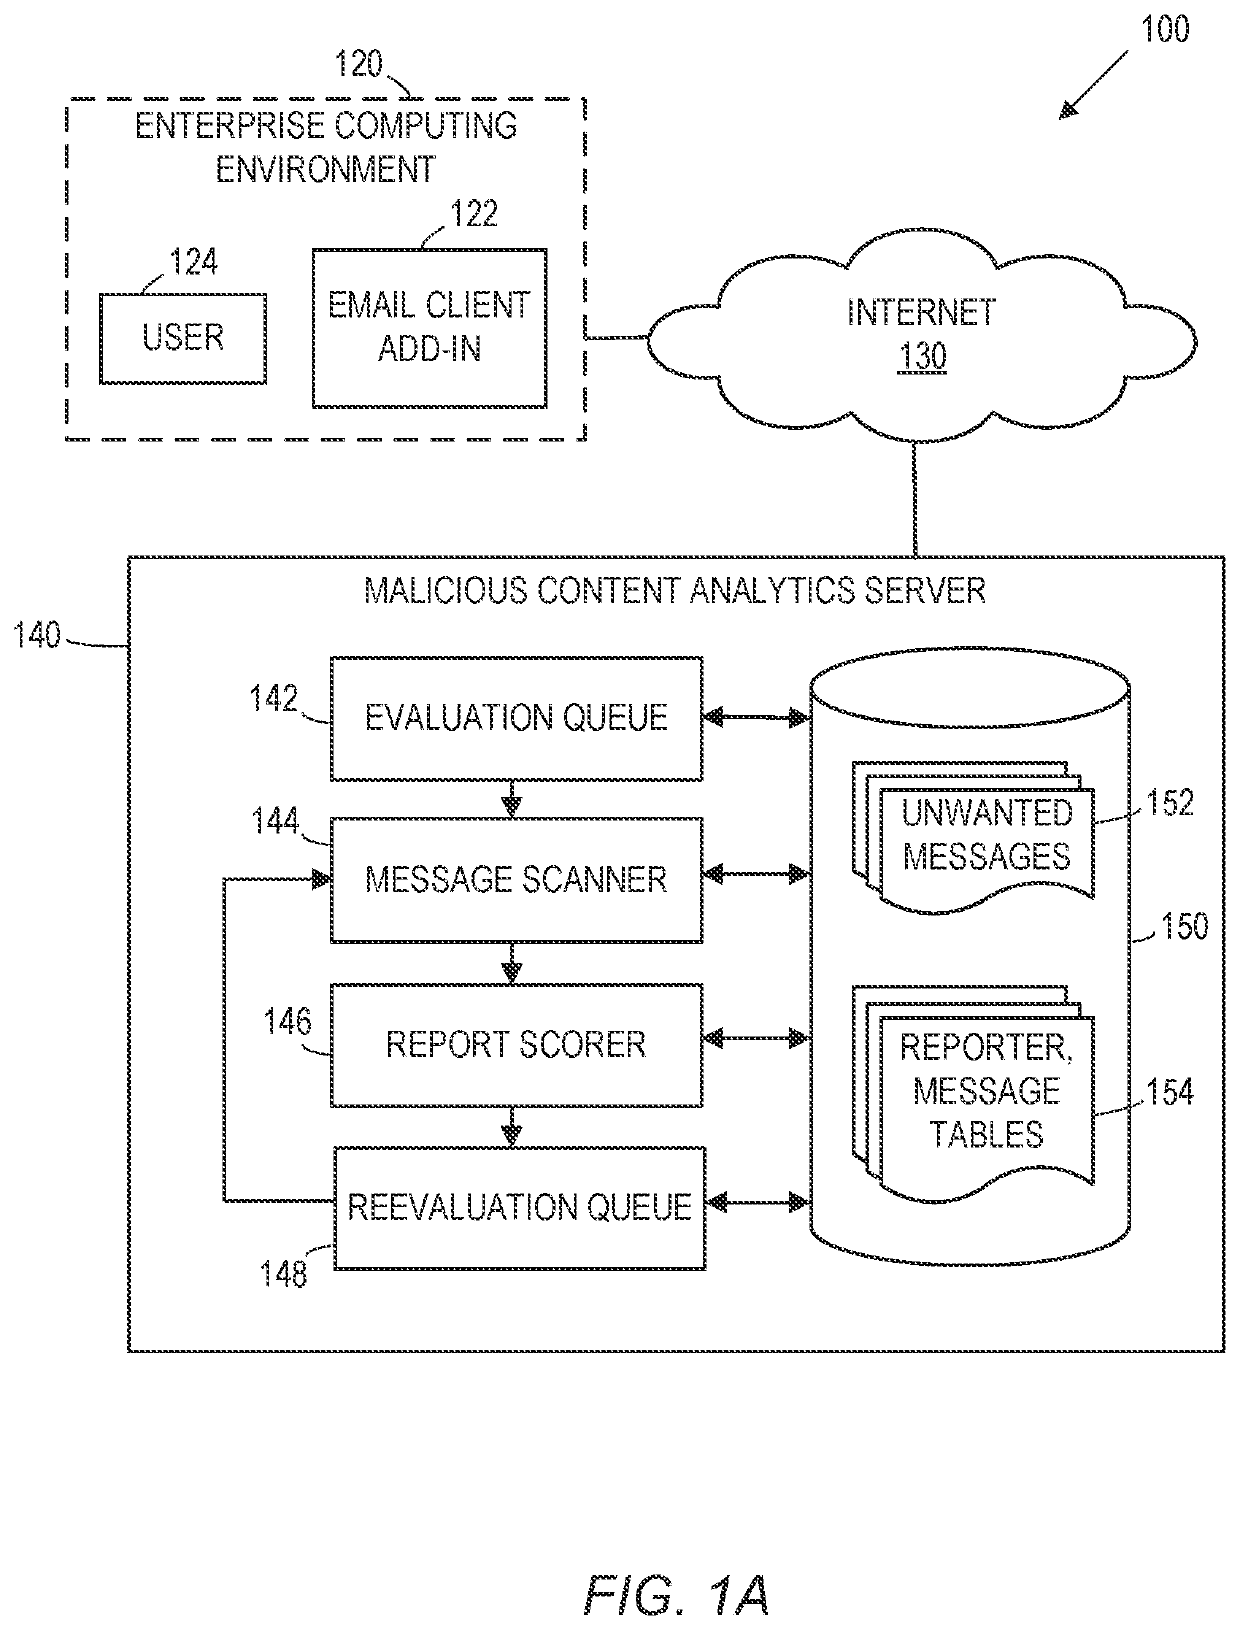 System and method for improving detection of bad content by analyzing reported content